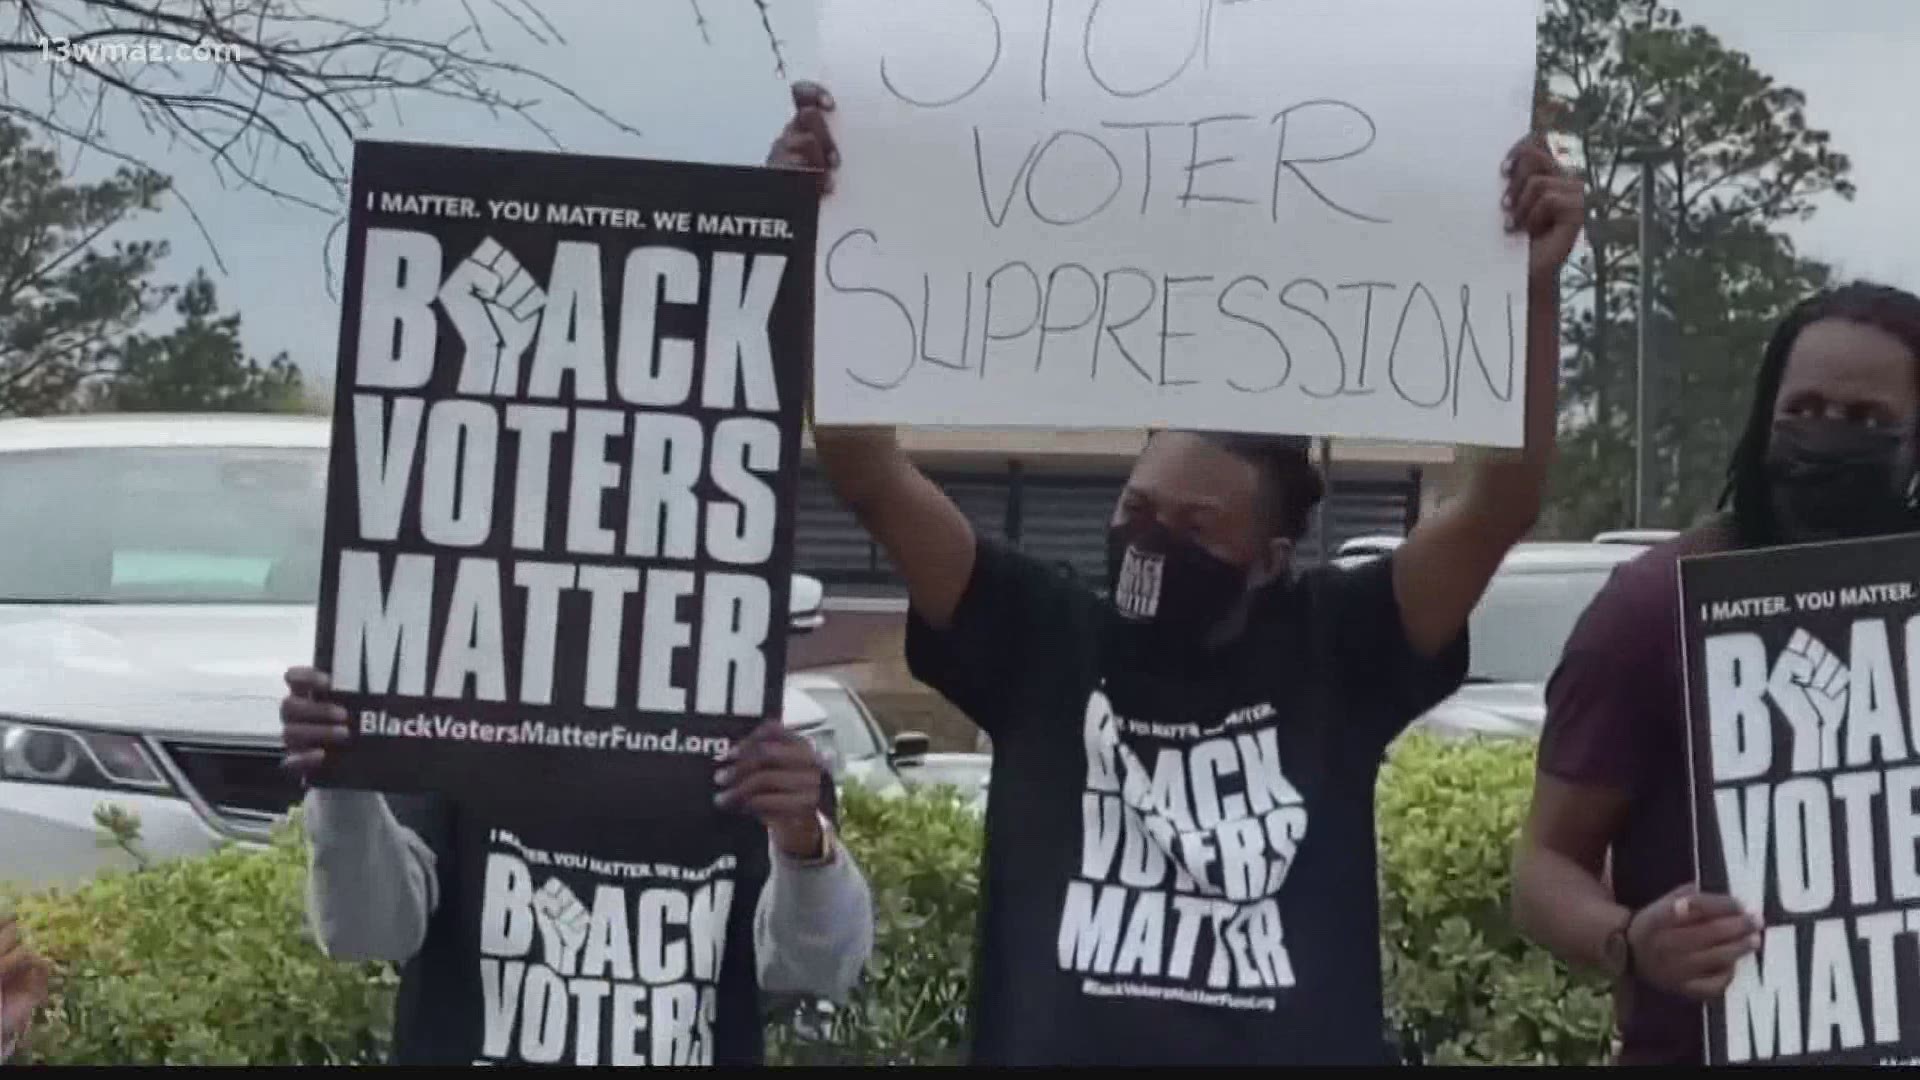 Macon groups protested as part of a statewide effort to boycott major Georgia businesses in response to the signing of the state's new voting law.